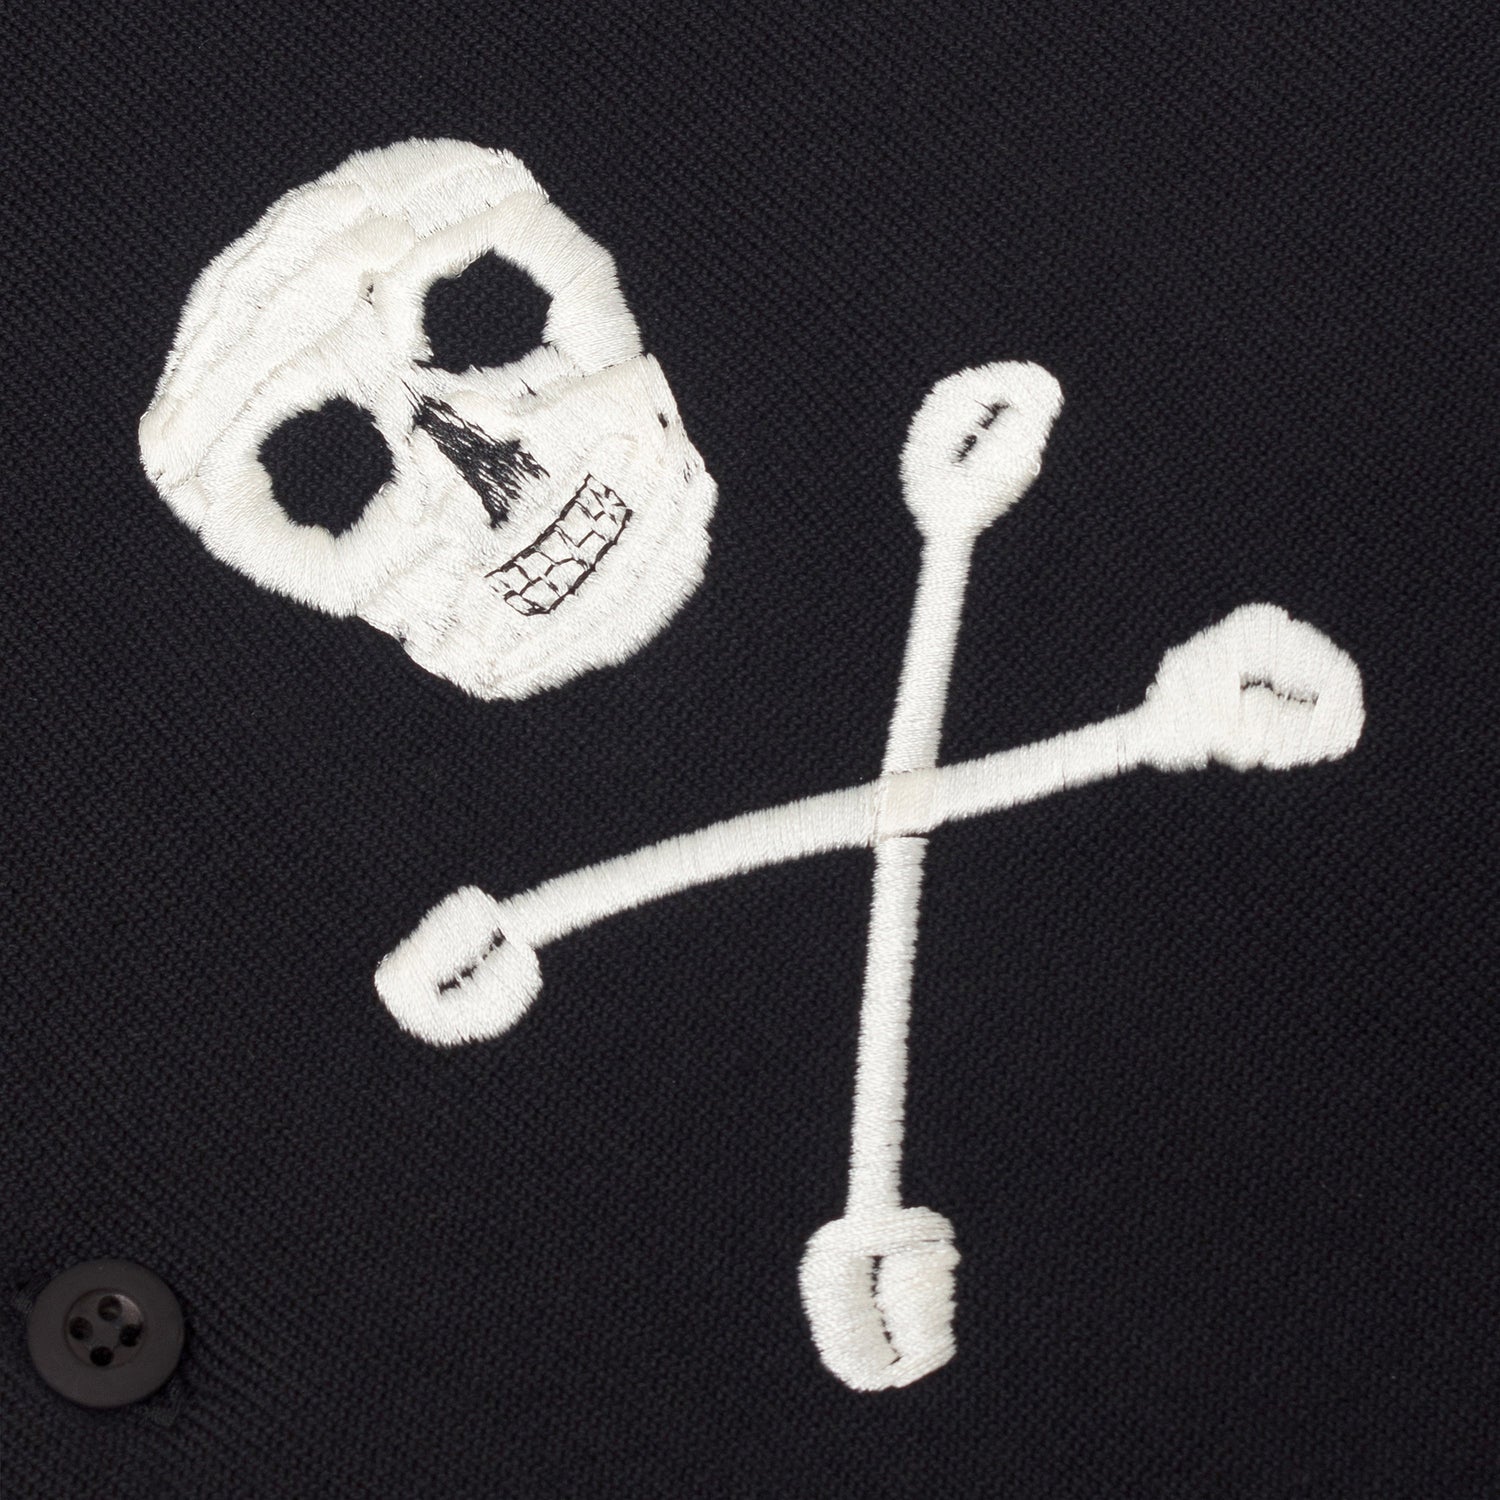 Embroidered skull and crossbones.